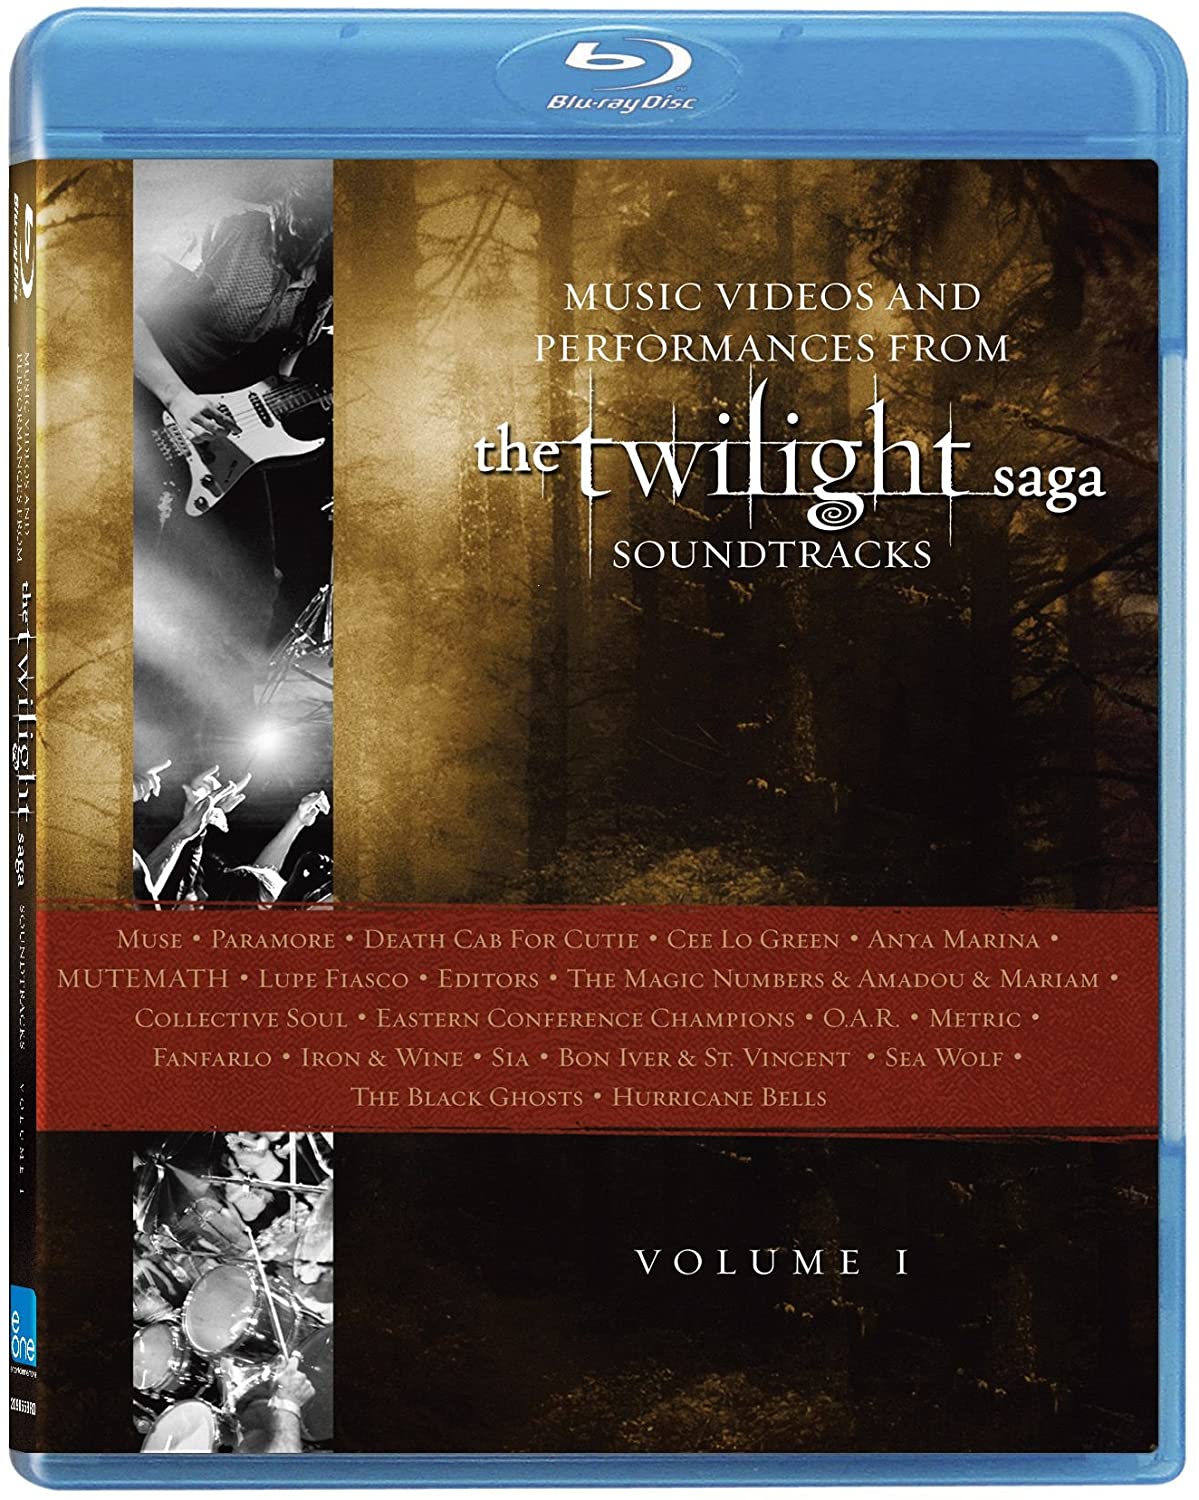 The Twilight Saga: Music Videos and Performances from the Soundtracks/ Volume One (Blu-Ray) [Blu-ray]